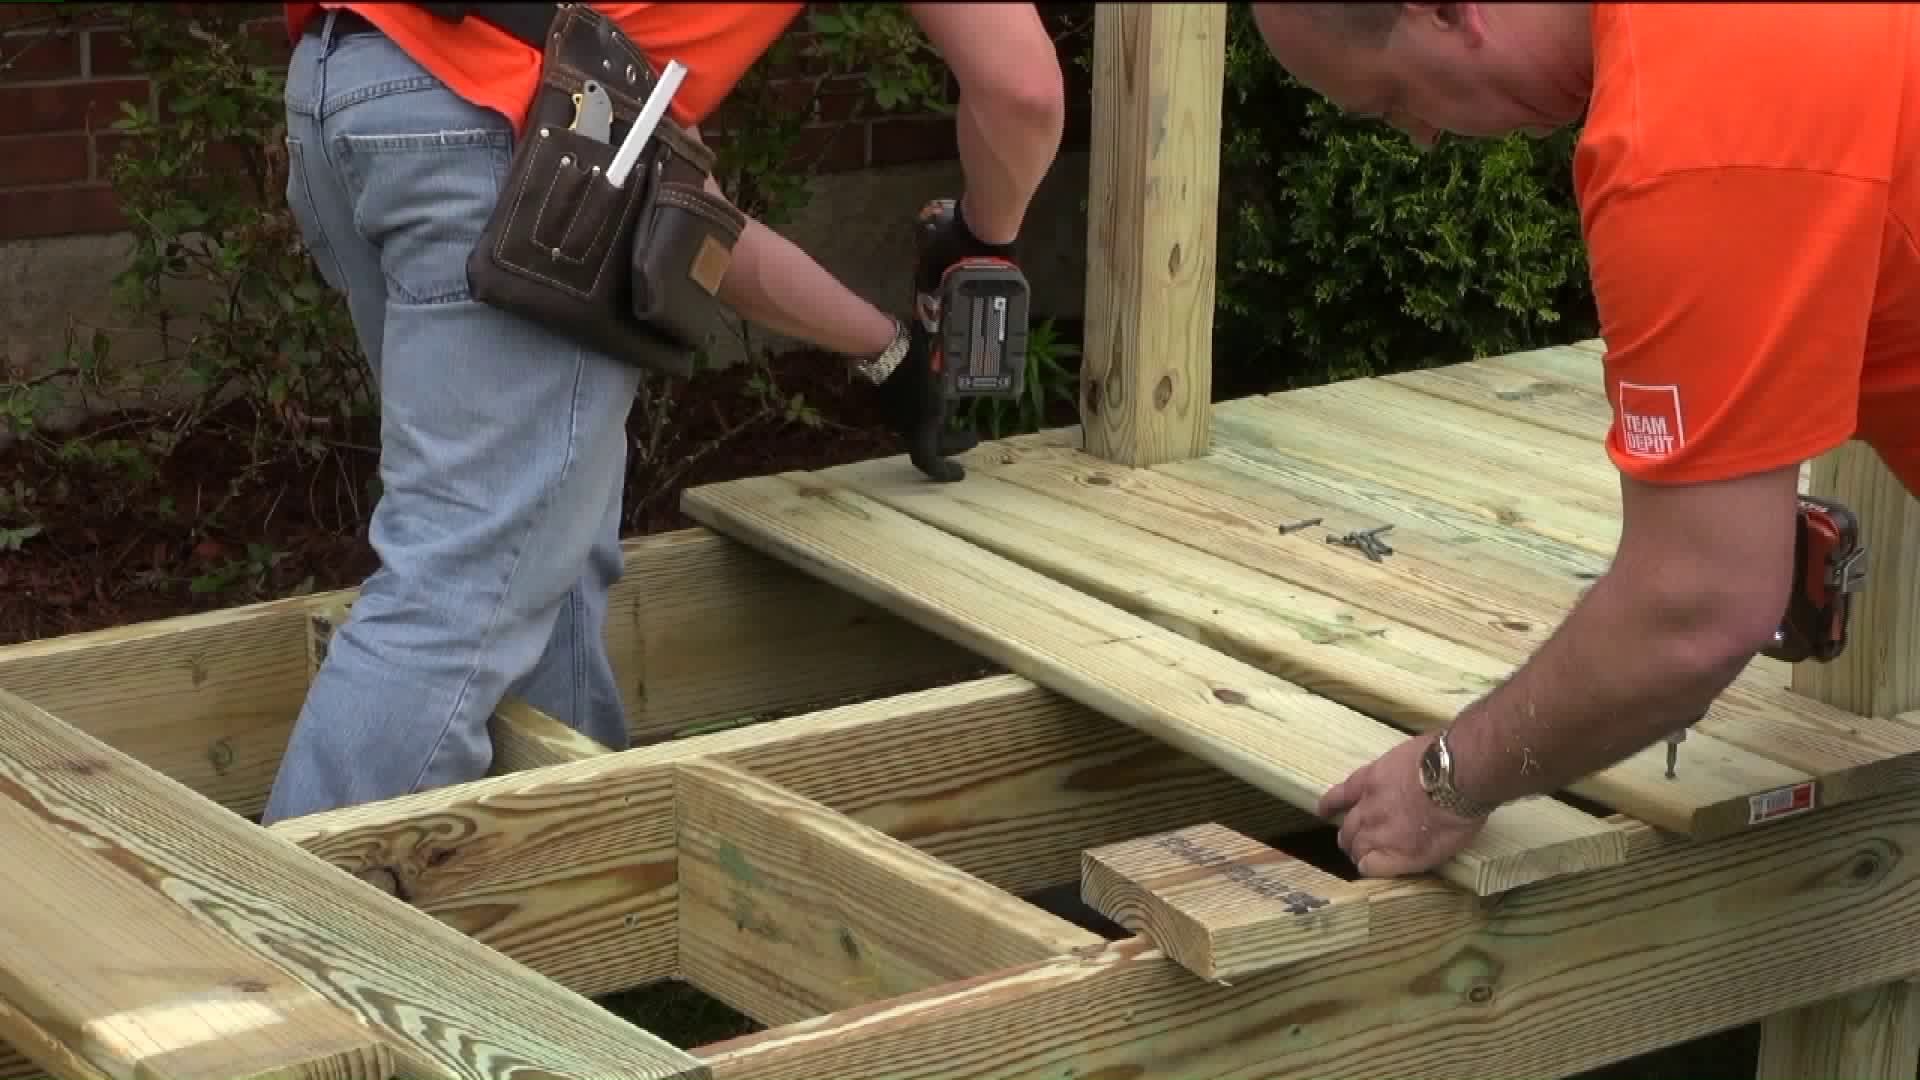 Army of Volunteers Giving Back to Disabled Veterans